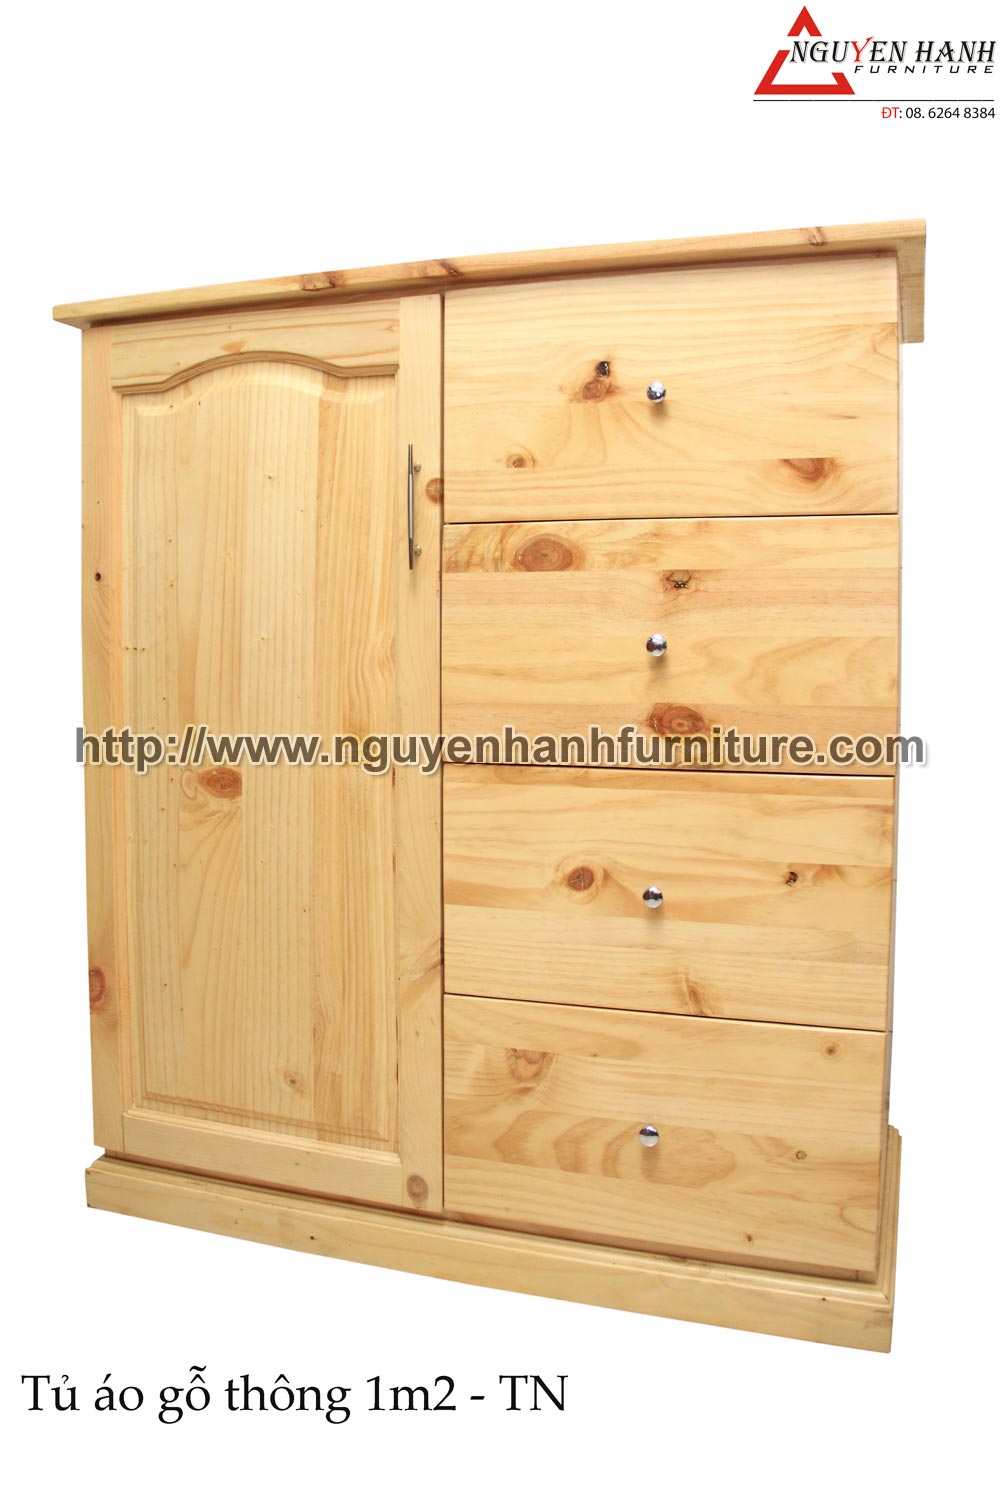 Name product: 1m2 Pine wood Wardrobe with drawers- Dimensions: 50 x 100 x 126cm - Description: Natural pine wood